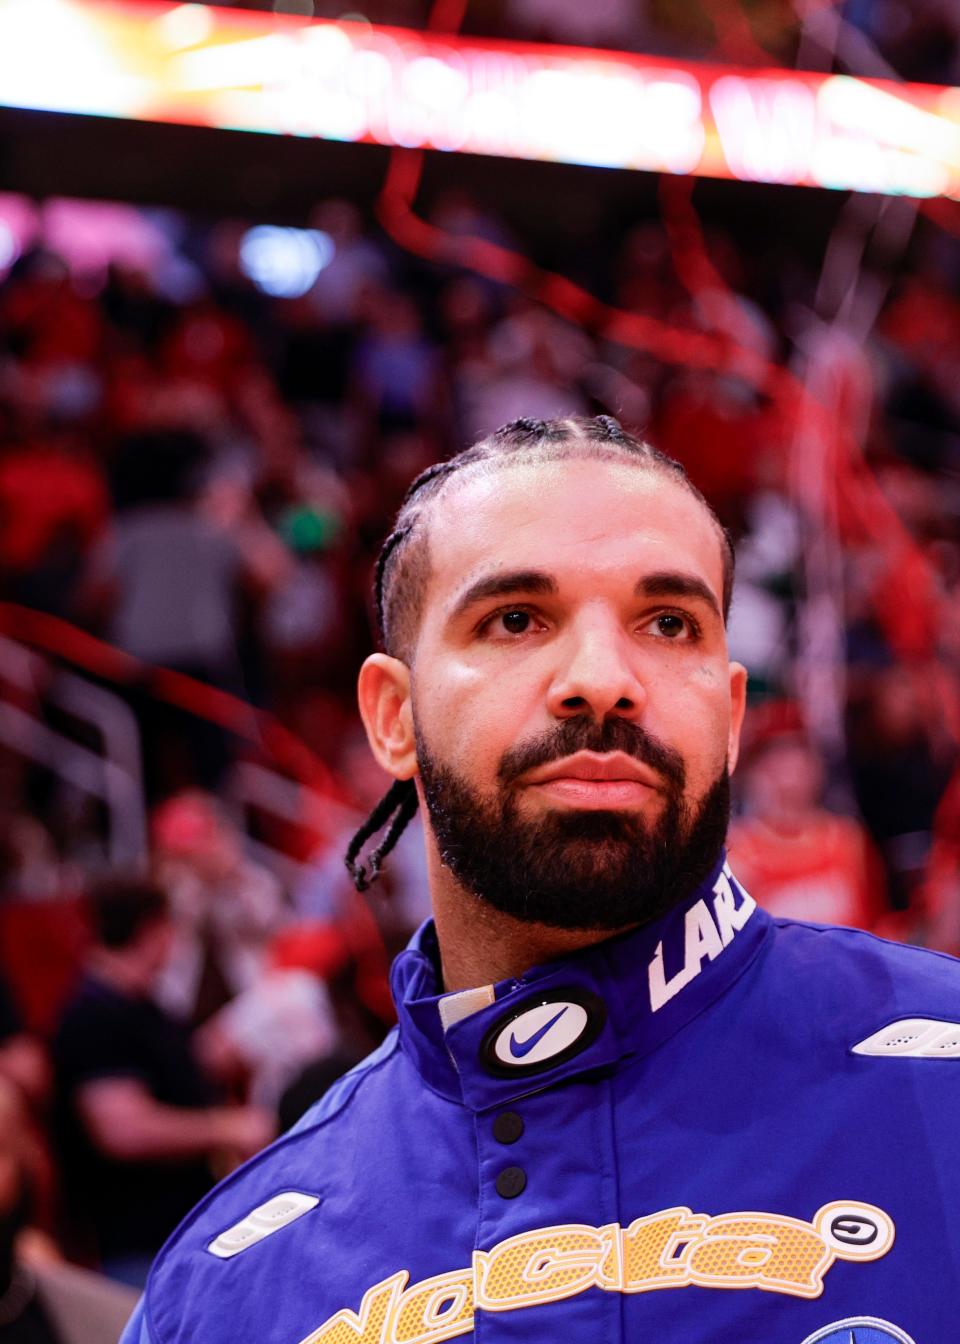 Drake, pictured in March of this year, is making headlines amid his feud with fellow rapper Kendrick Lamar after a shooting outside his Toronto home.